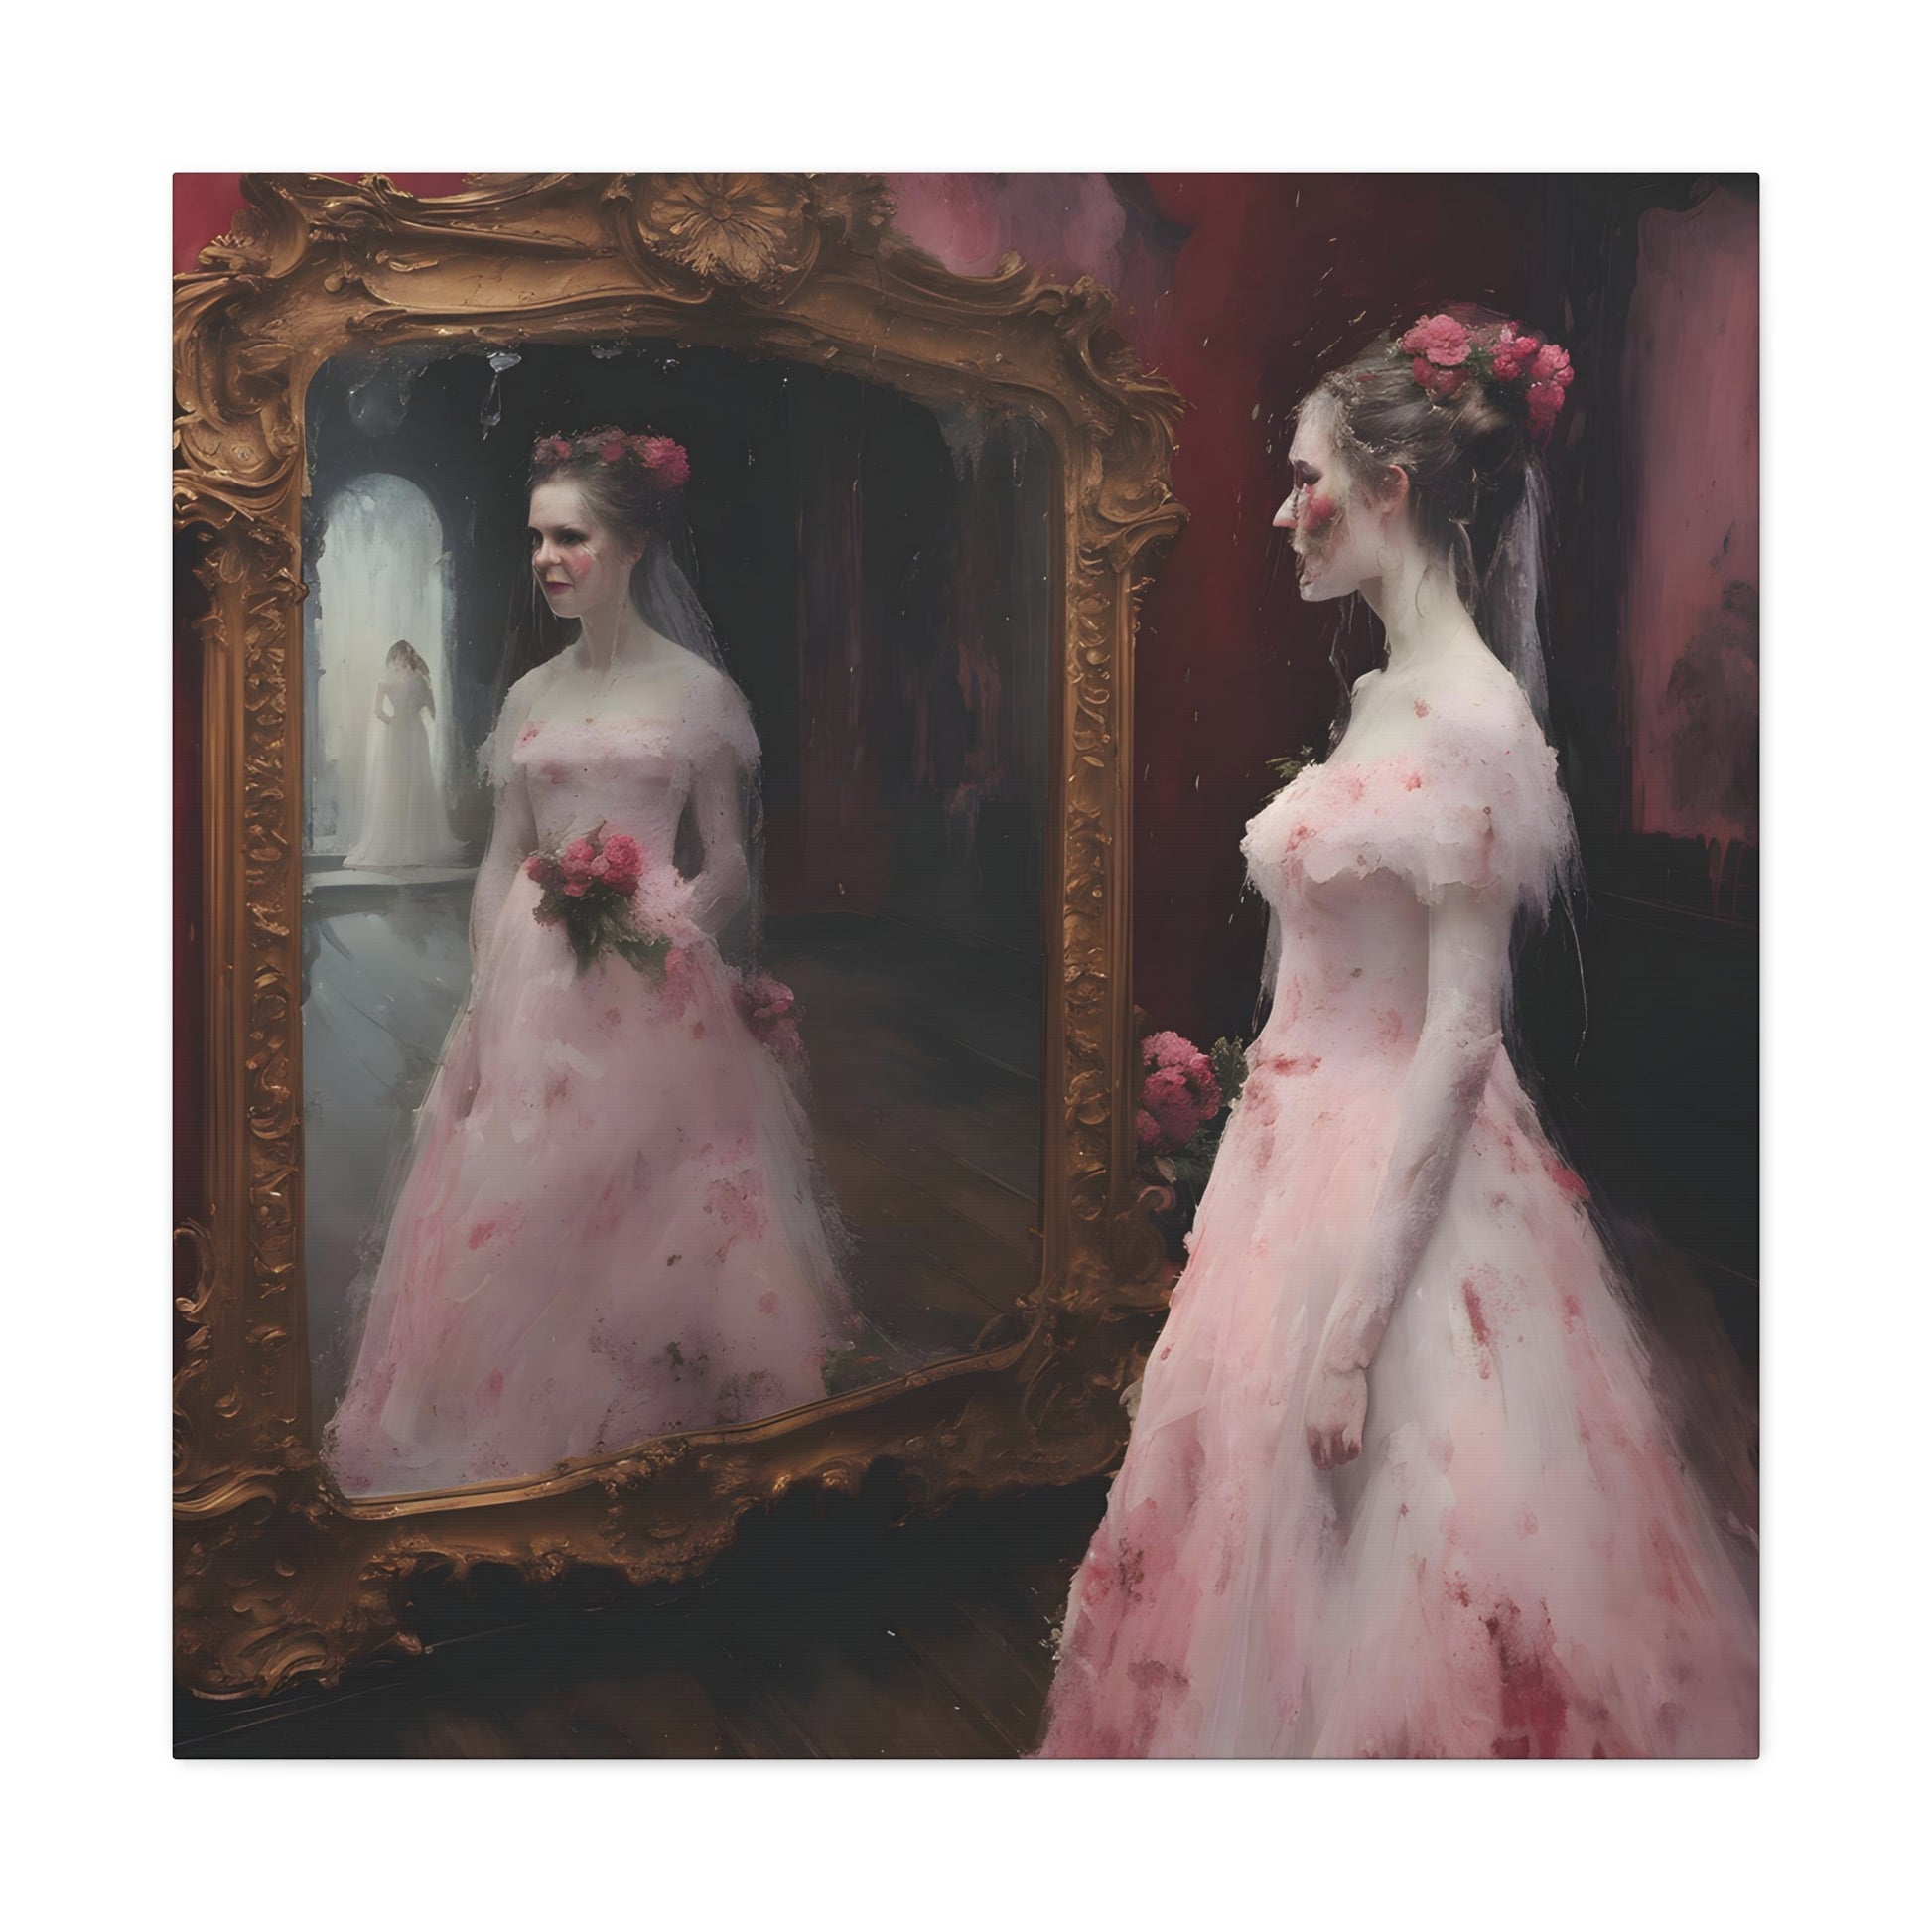 image 3 Reflections of a Timeless Moment' painting captures a bride in a vintage pink gown, reflecting in a grandiose mirror in a Victorian dressing room. The artwork contrasts the opulent gold frame with the room's dark tones, highlighting her delicate dress and tender expression, symbolizing personal reflection and quiet joy before a life-changing event